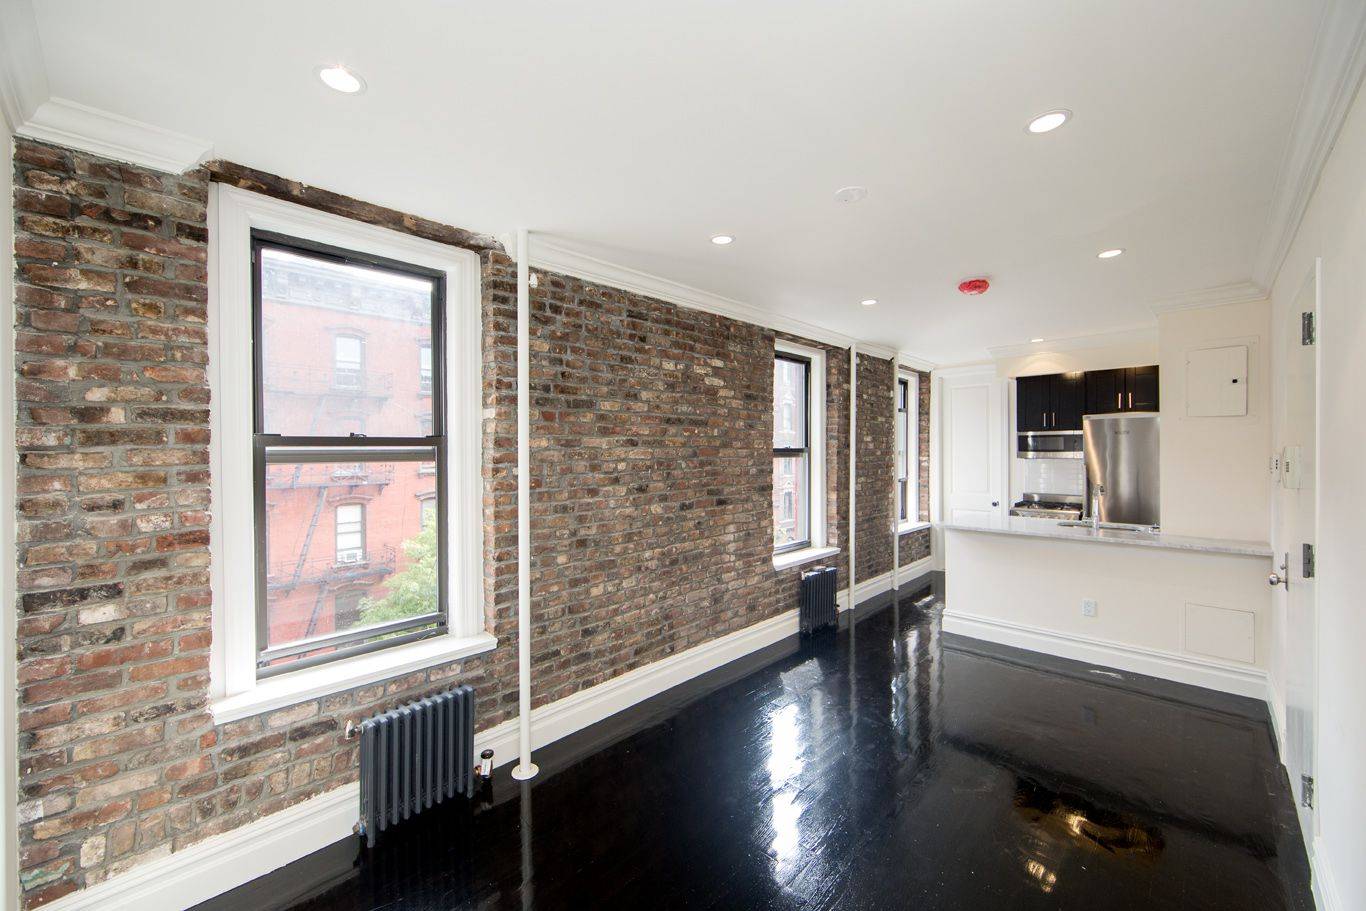 East Village-Large Renovated 2 bedroom w/ laundry in unit